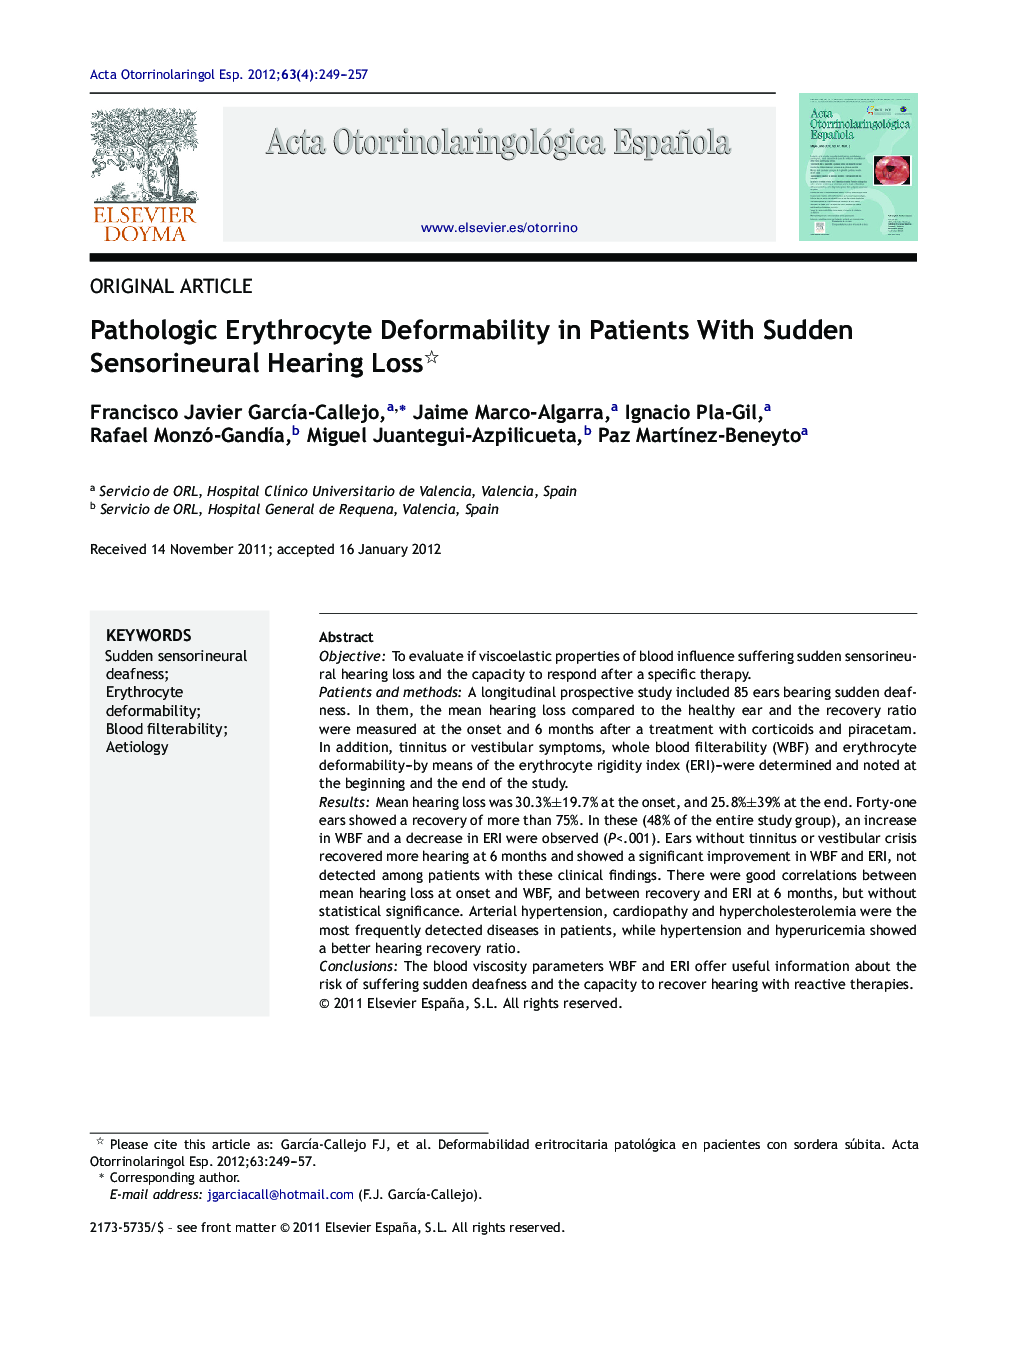 Pathologic Erythrocyte Deformability in Patients With Sudden Sensorineural Hearing Loss 